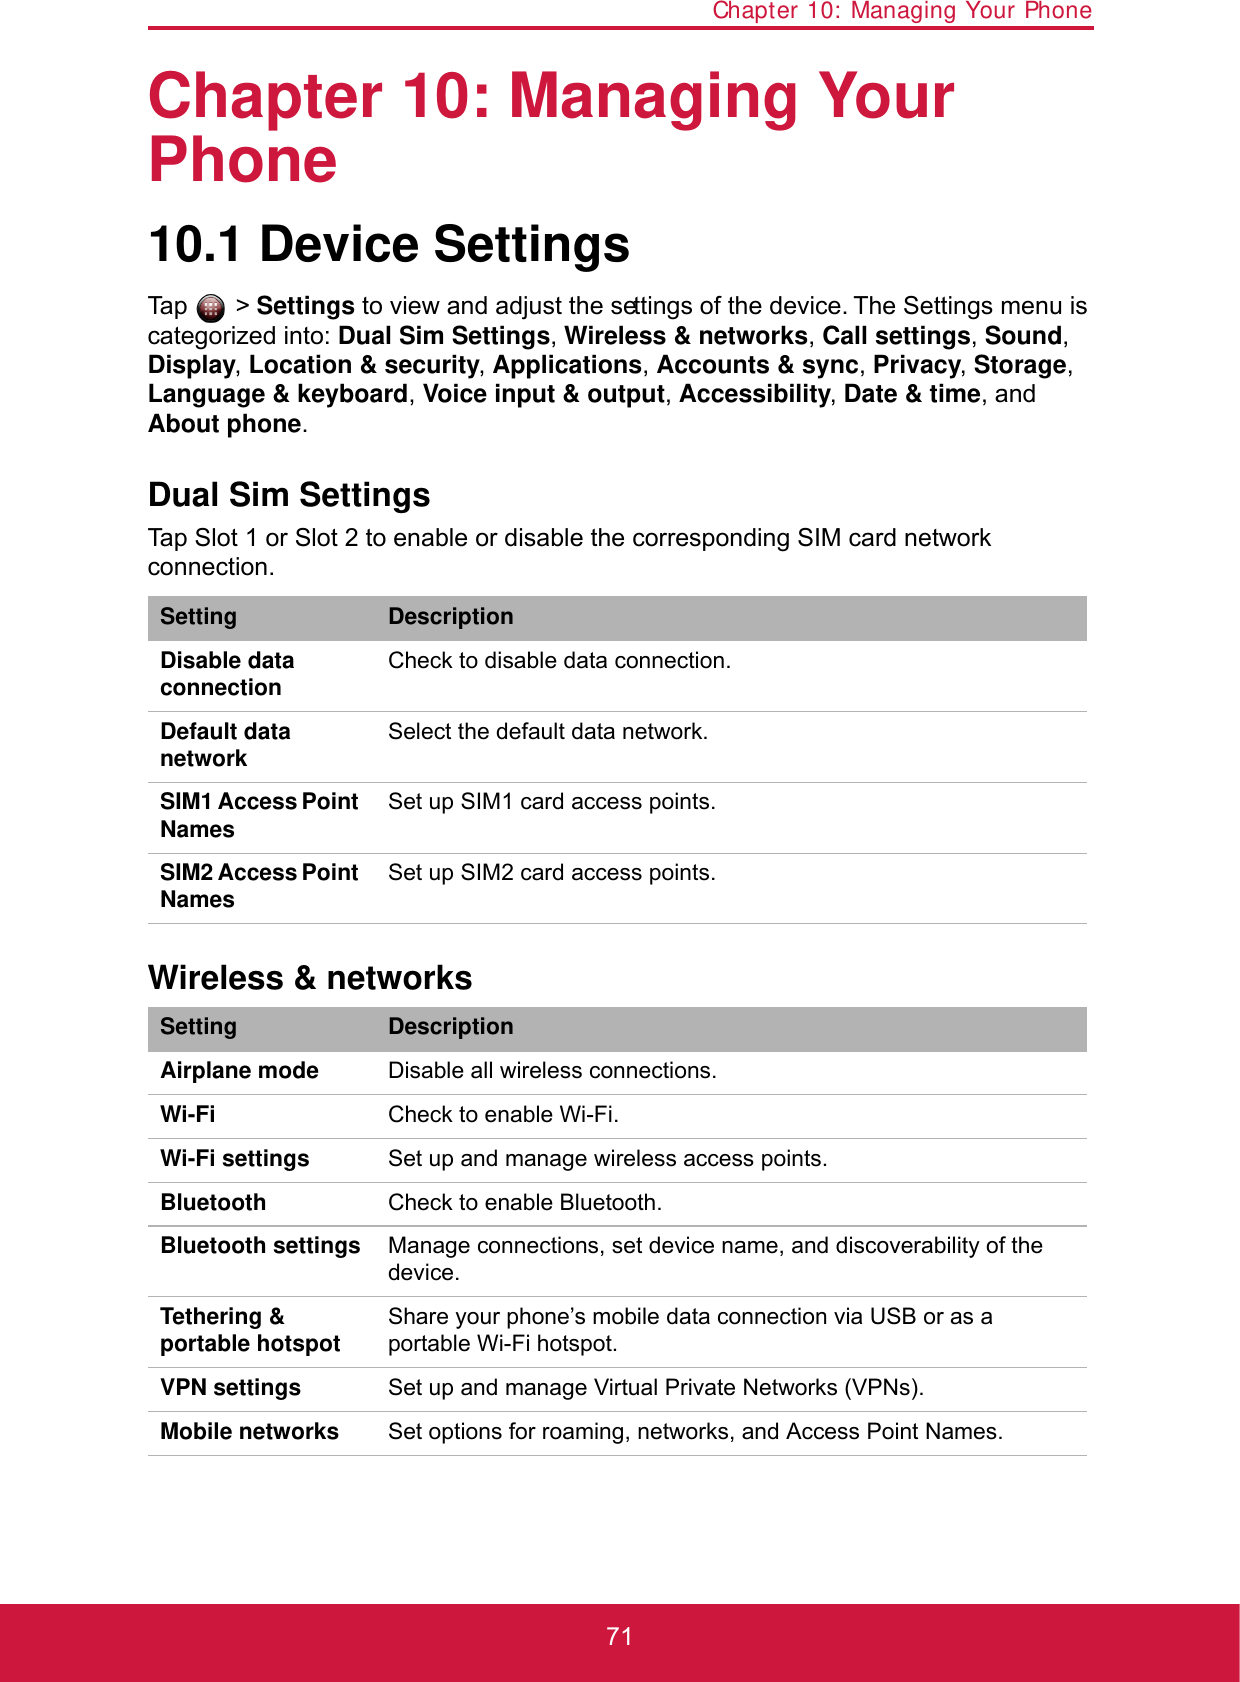 Chapter 10: Managing Your Phone71Chapter 10: Managing Your Phone10.1 Device SettingsTap  &gt; Settings to view and adjust the settings of the device. The Settings menu is categorized into: Dual Sim Settings, Wireless &amp; networks, Call settings, Sound, Display, Location &amp; security, Applications, Accounts &amp; sync, Privacy, Storage, Language &amp; keyboard, Voice input &amp; output, Accessibility, Date &amp; time, and About phone.Dual Sim SettingsTap Slot 1 or Slot 2 to enable or disable the corresponding SIM card network connection.Wireless &amp; networksSetting DescriptionDisable data connection Check to disable data connection.Default data network Select the default data network.SIM1 Access Point Names Set up SIM1 card access points.SIM2 Access Point Names Set up SIM2 card access points.Setting DescriptionAirplane mode Disable all wireless connections.Wi-Fi Check to enable Wi-Fi.Wi-Fi settings Set up and manage wireless access points.Bluetooth Check to enable Bluetooth.Bluetooth settings Manage connections, set device name, and discoverability of the device.Tethering &amp; portable hotspot Share your phone’s mobile data connection via USB or as a portable Wi-Fi hotspot.VPN settings Set up and manage Virtual Private Networks (VPNs).Mobile networks Set options for roaming, networks, and Access Point Names.